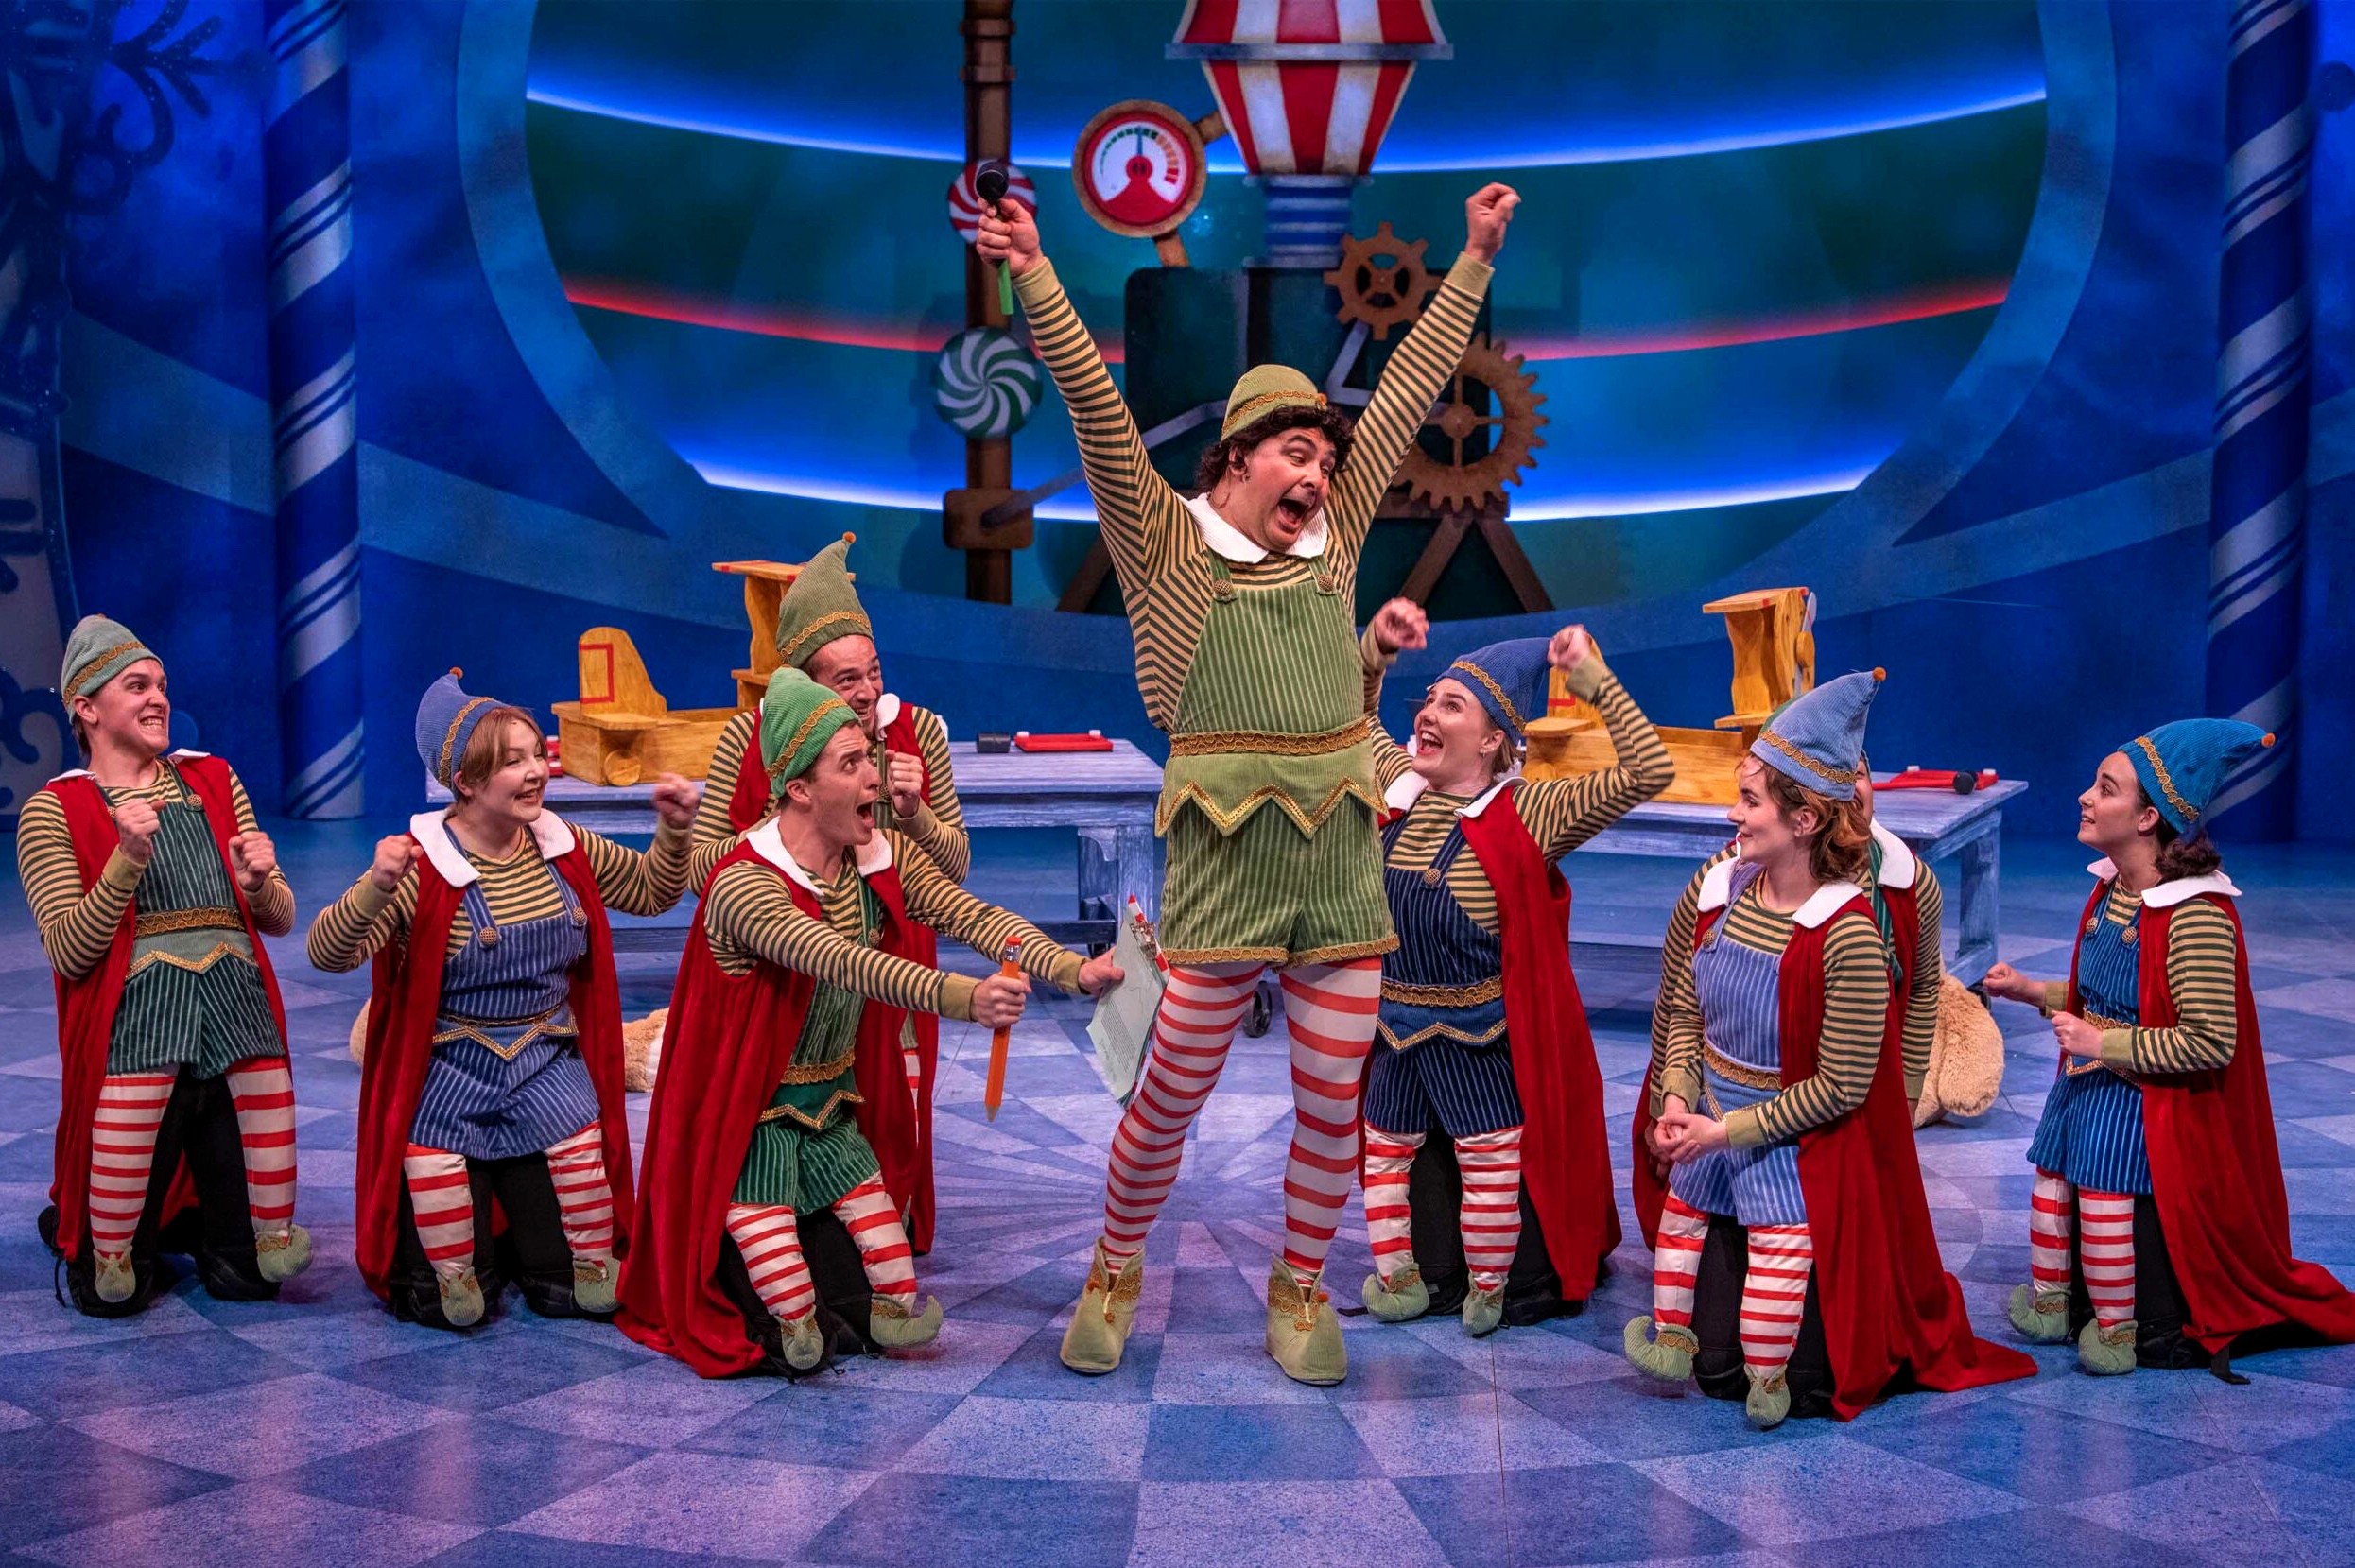 Holiday shopping, 'Elf' musical and 5 other things to do this